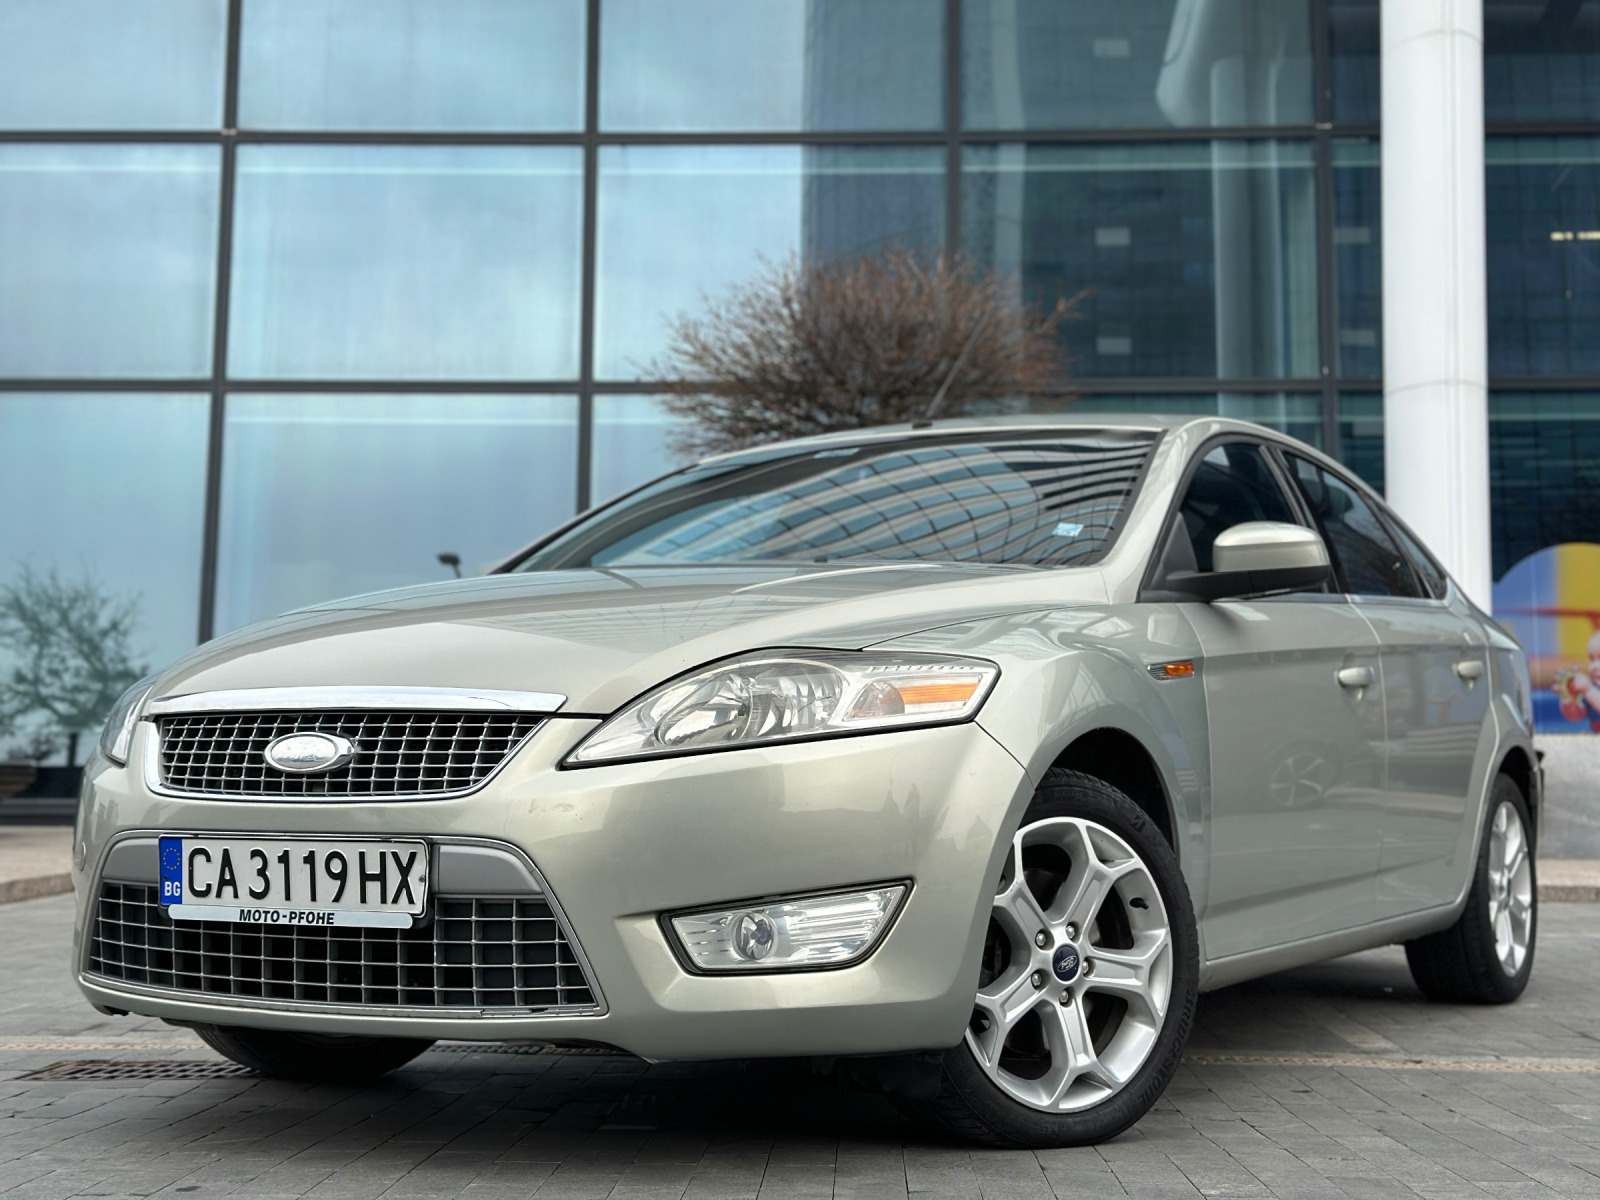 Ford Mondeo Ford Mondeo 2.0 - изображение 1